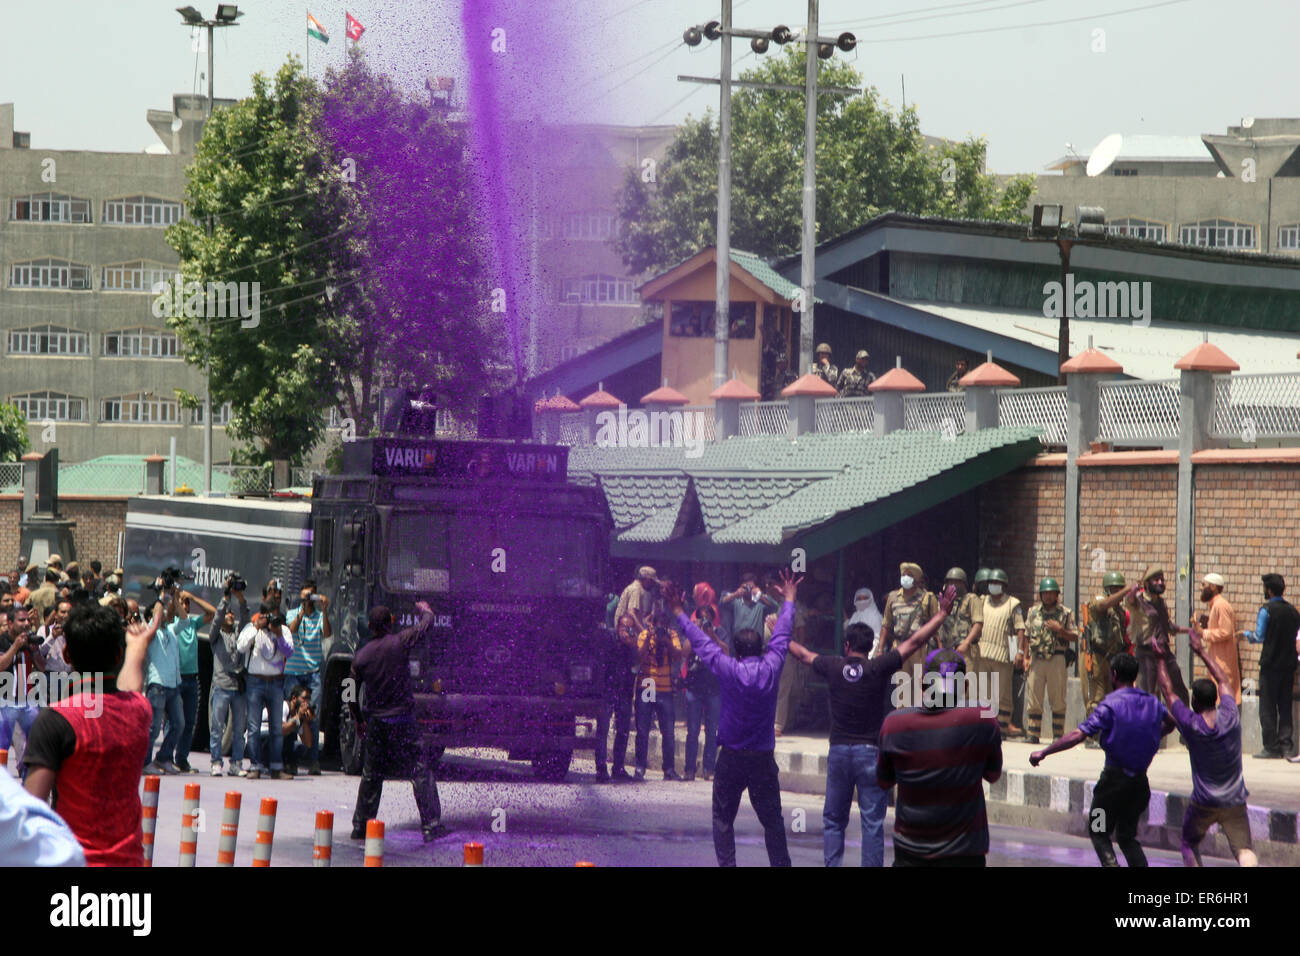 Srinagar, Kashmir. 28th May, 2015. Jammu and Kashmir government employees shouting anti-government slogans as Police can charge and sprayed purple-colored water from water cannon to disperse them during a protest in Srinagar, on Thursday. Police detained dozens of employees during the protesters. The employees had planned to picket the Civil Secretariat, which houses offices of the Chief Minister, ministers Mufti Mohd Sayed and top bureaucrats Credit:  NISARGMEDIA/Alamy Live News Stock Photo